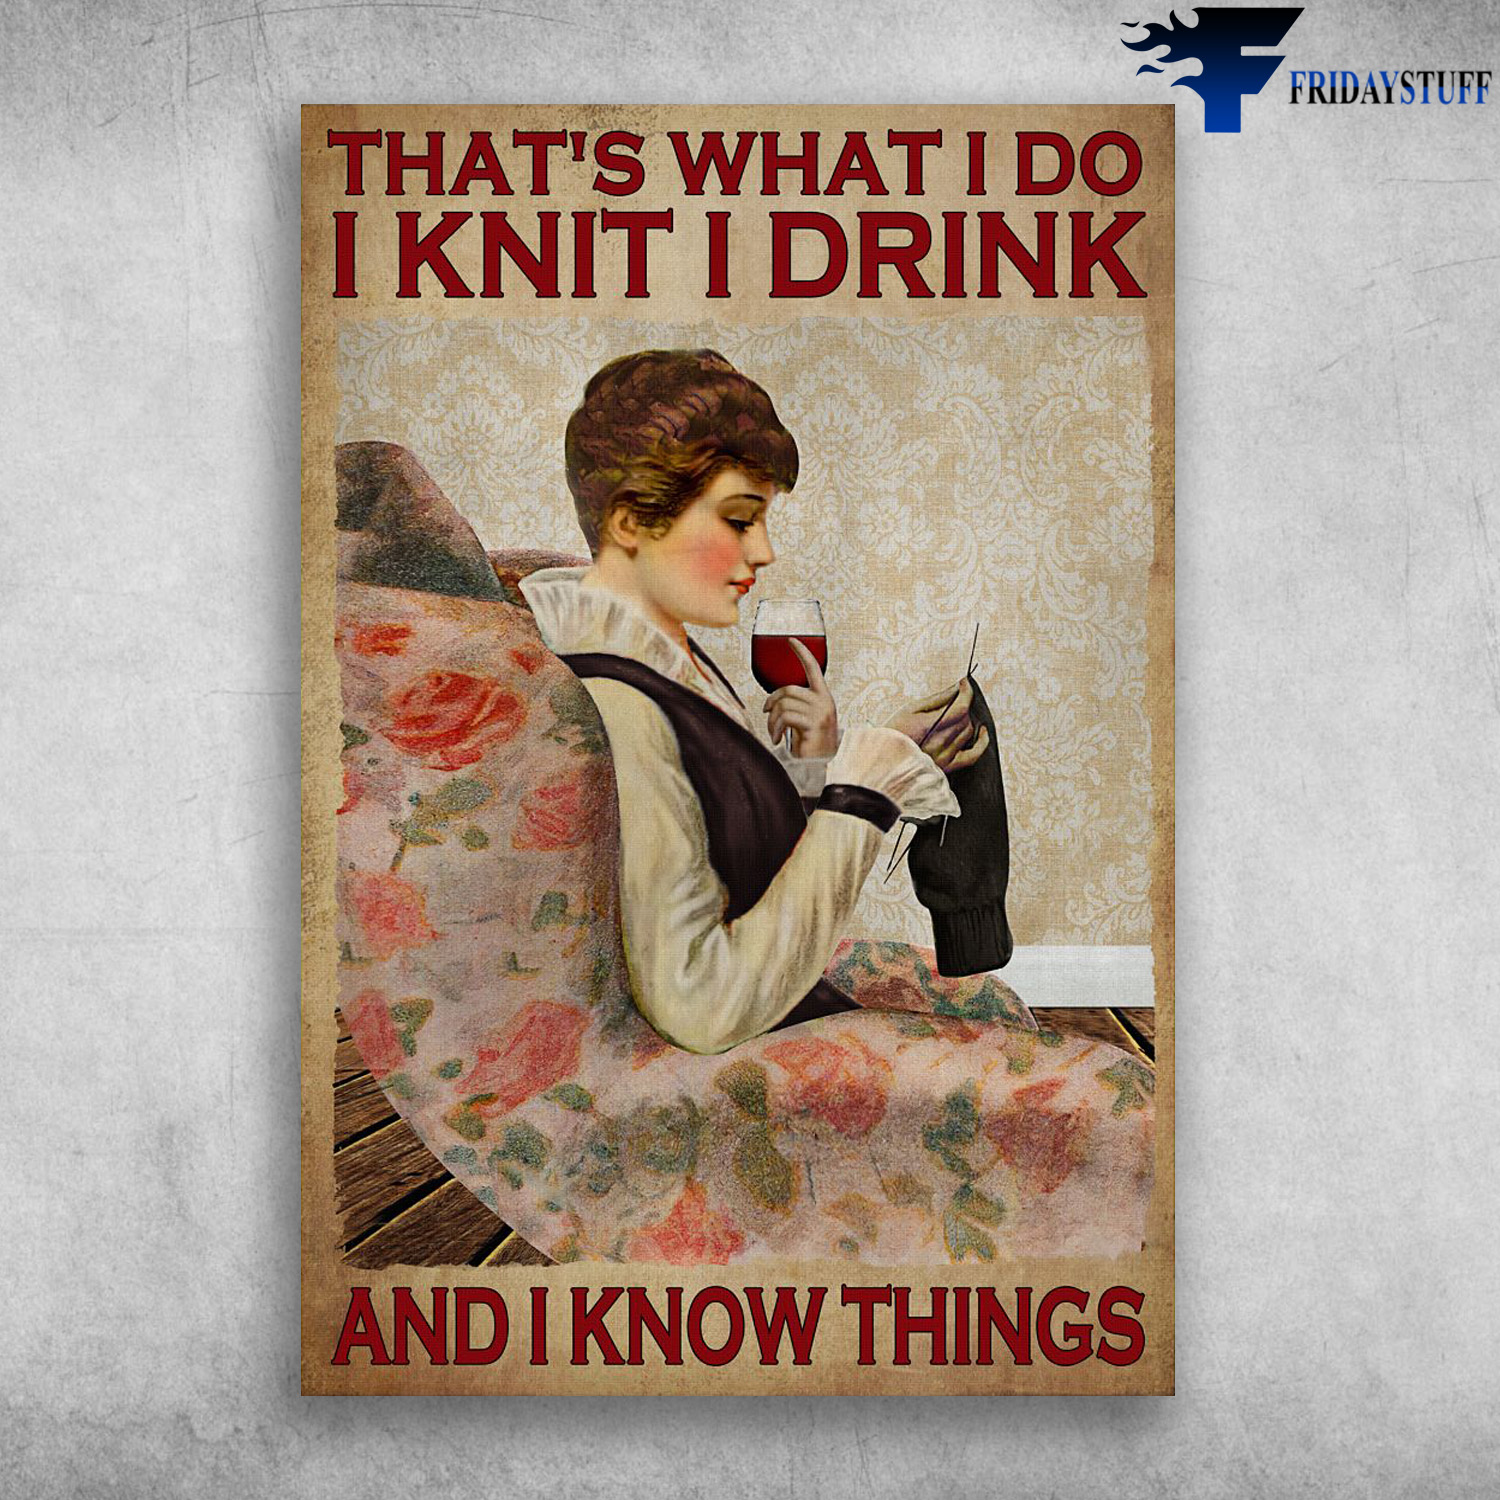 Lady Girl Knitting And Wine - That's What I Do, I Knit, I Drink, And I Know Things